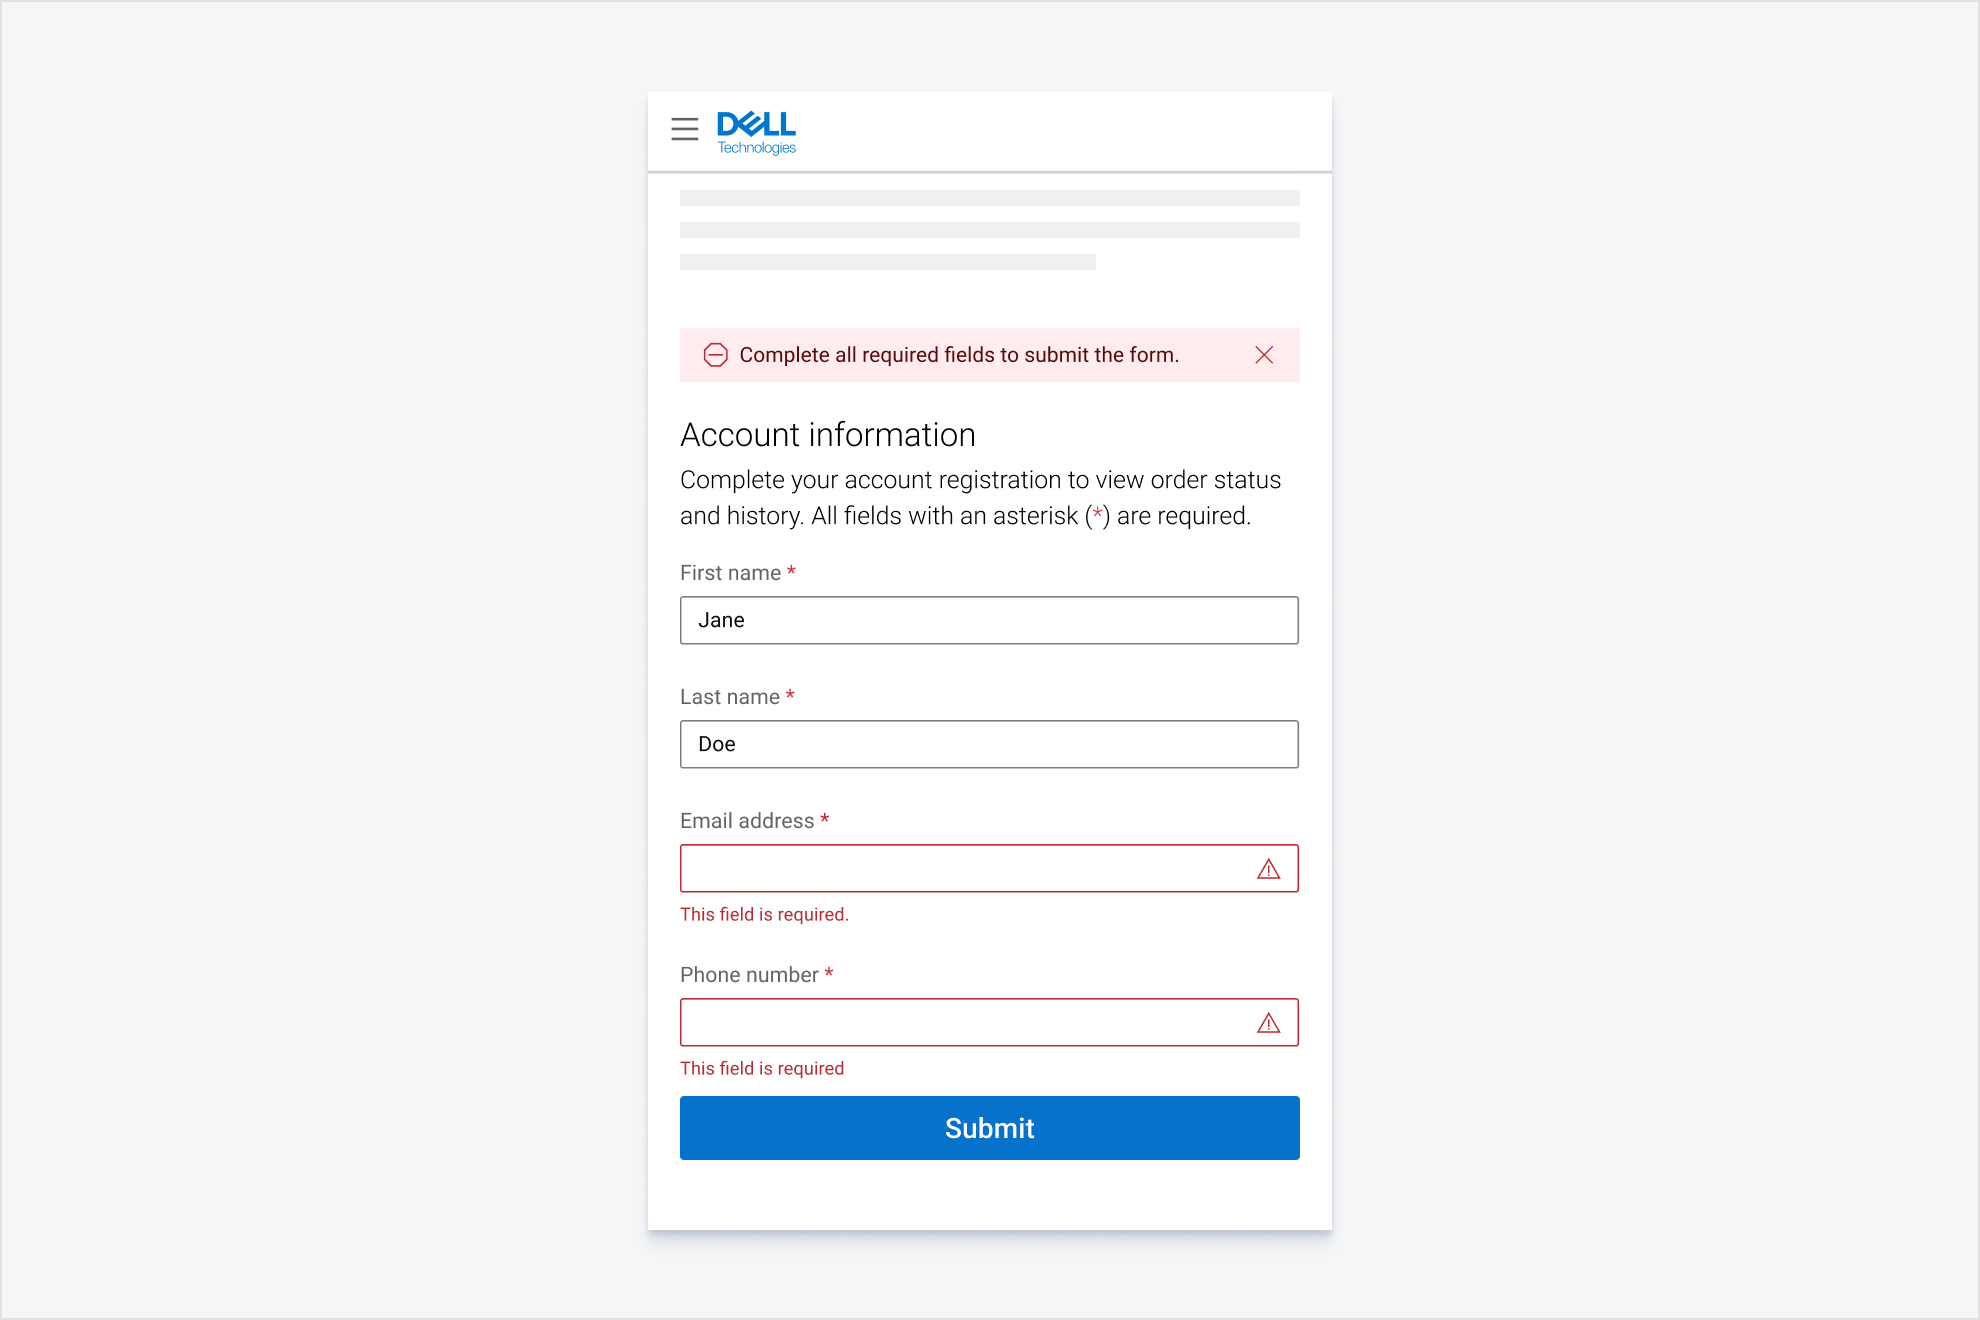 An account registration form with in-line errors and a contextual message bar showing additional information: “Complete all required fields to submit the form.” Email address and phone number fields are incomplete.